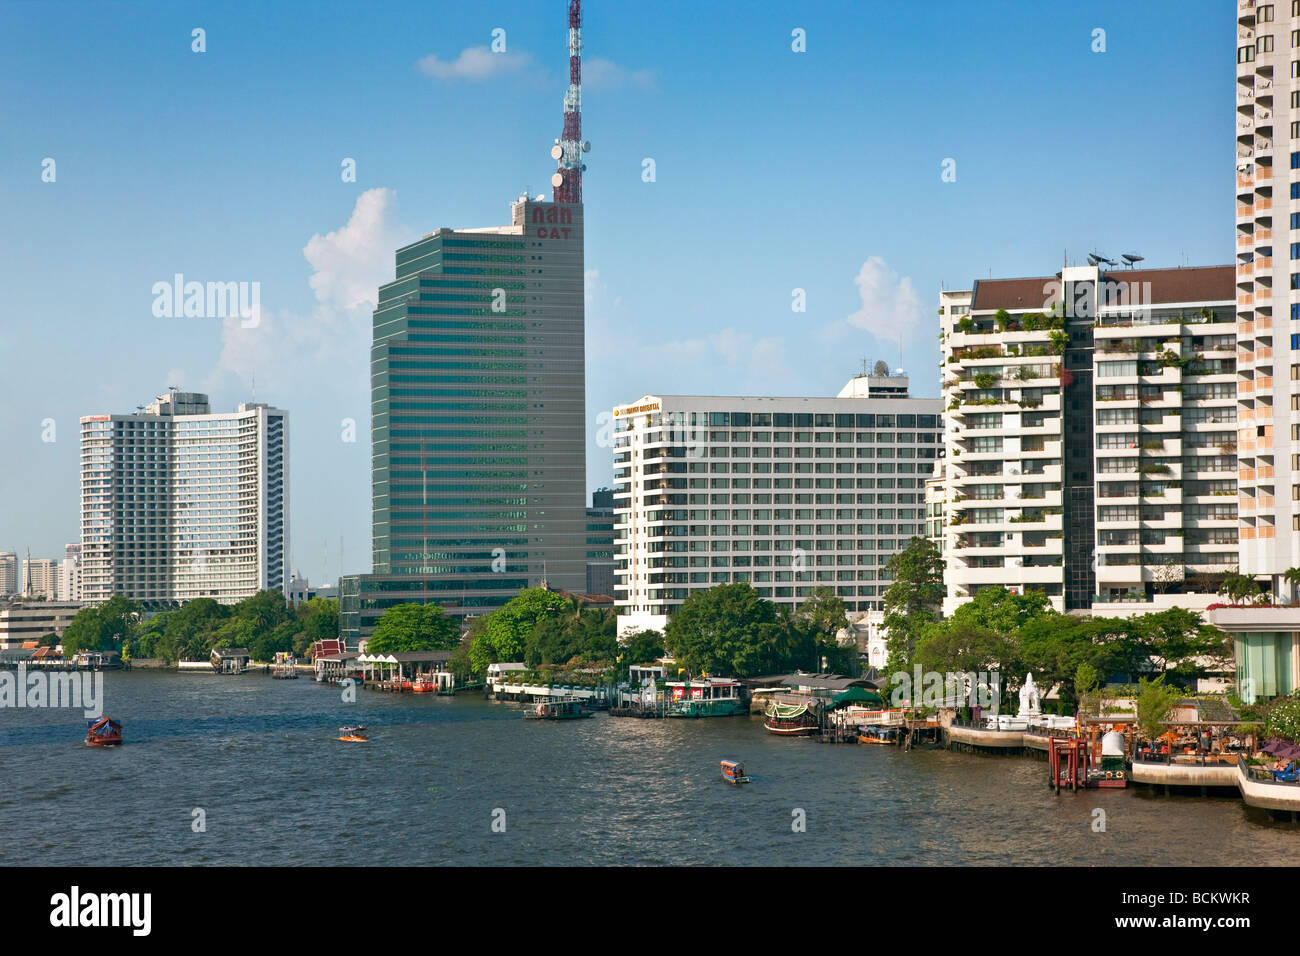 Thailand. A view of the impressive development along the Chao Phraya River where many five-star tourist hotel are situated. Stock Photo